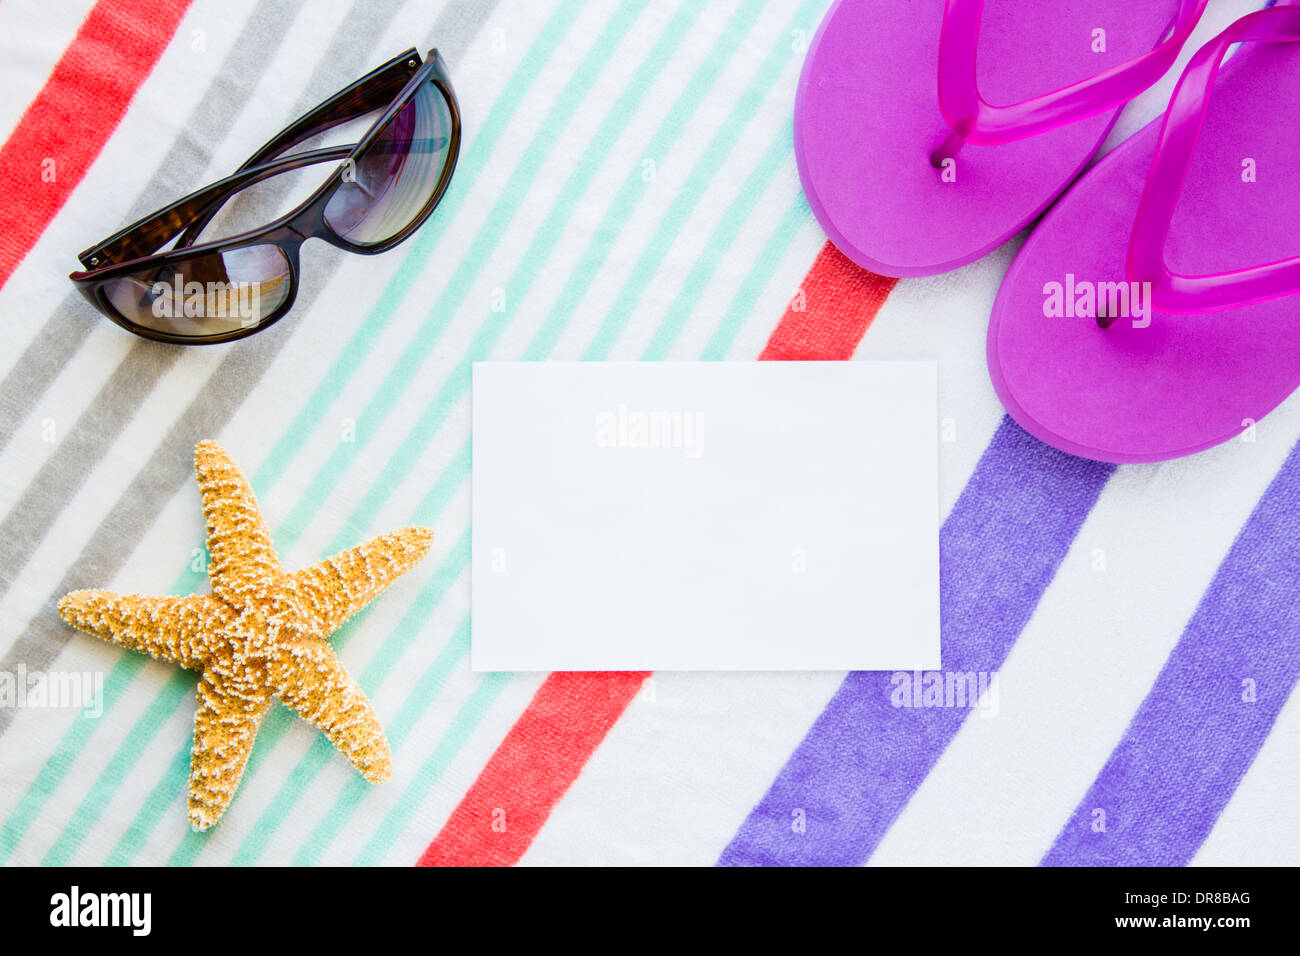 Beach scene with purple flip flops, a starfish, and sunglasses on a striped beach towel with copy space. Stock Photo